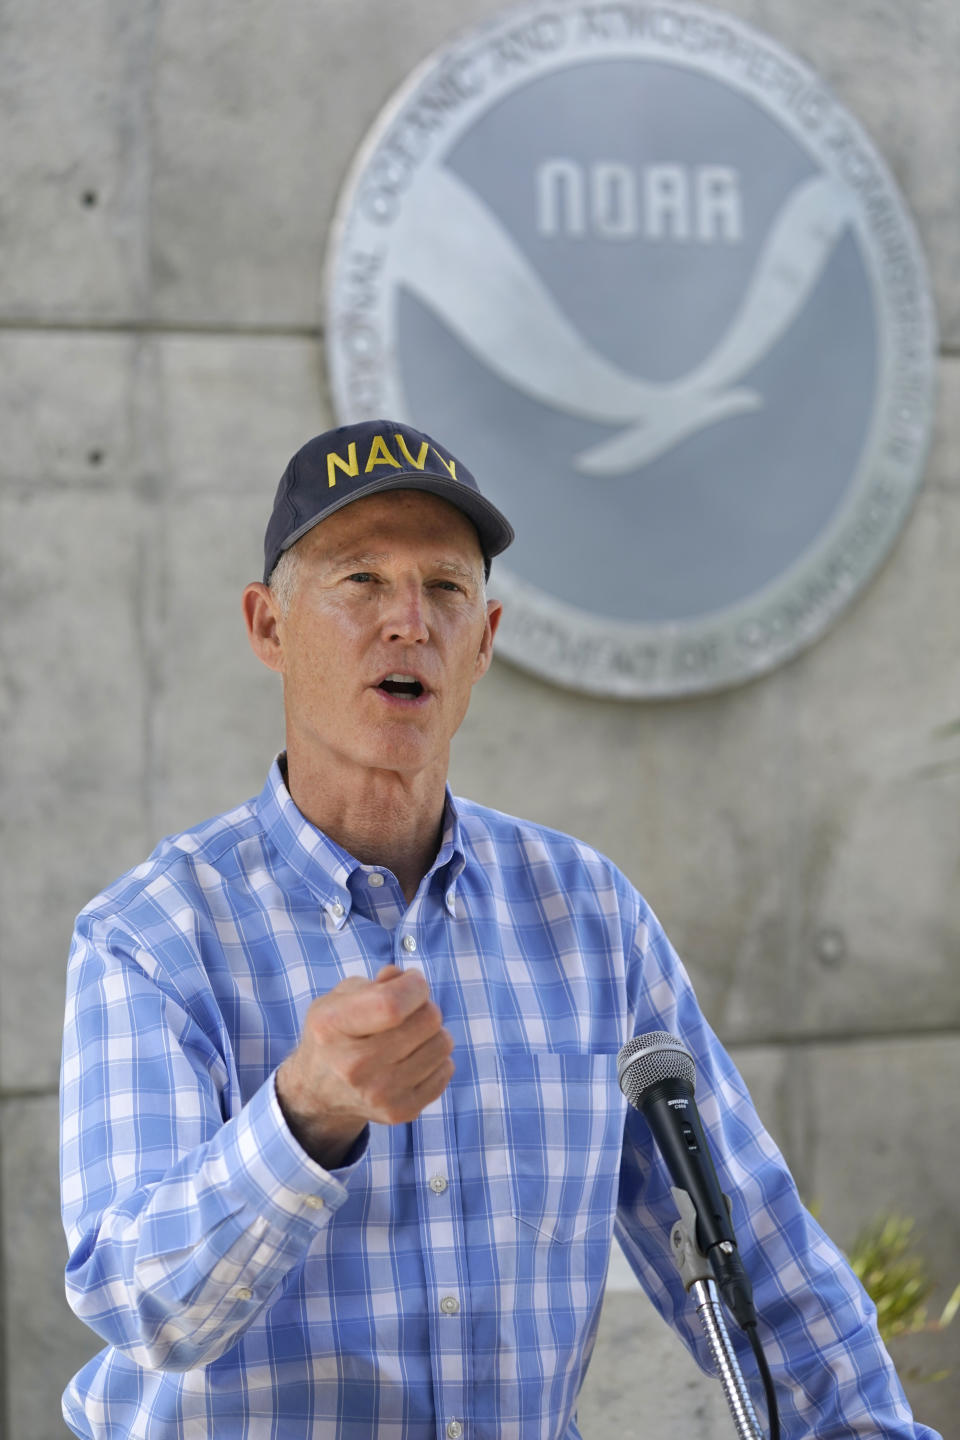 Senator Rick Scott, R-Fla., speaks during a news conference after having toured the National Hurricane Center, Tuesday, June 1, 2021, in Miami. Tuesday marks the start of the 2021 Atlantic hurricane season which runs to Nov. 30. (AP Photo/Wilfredo Lee)